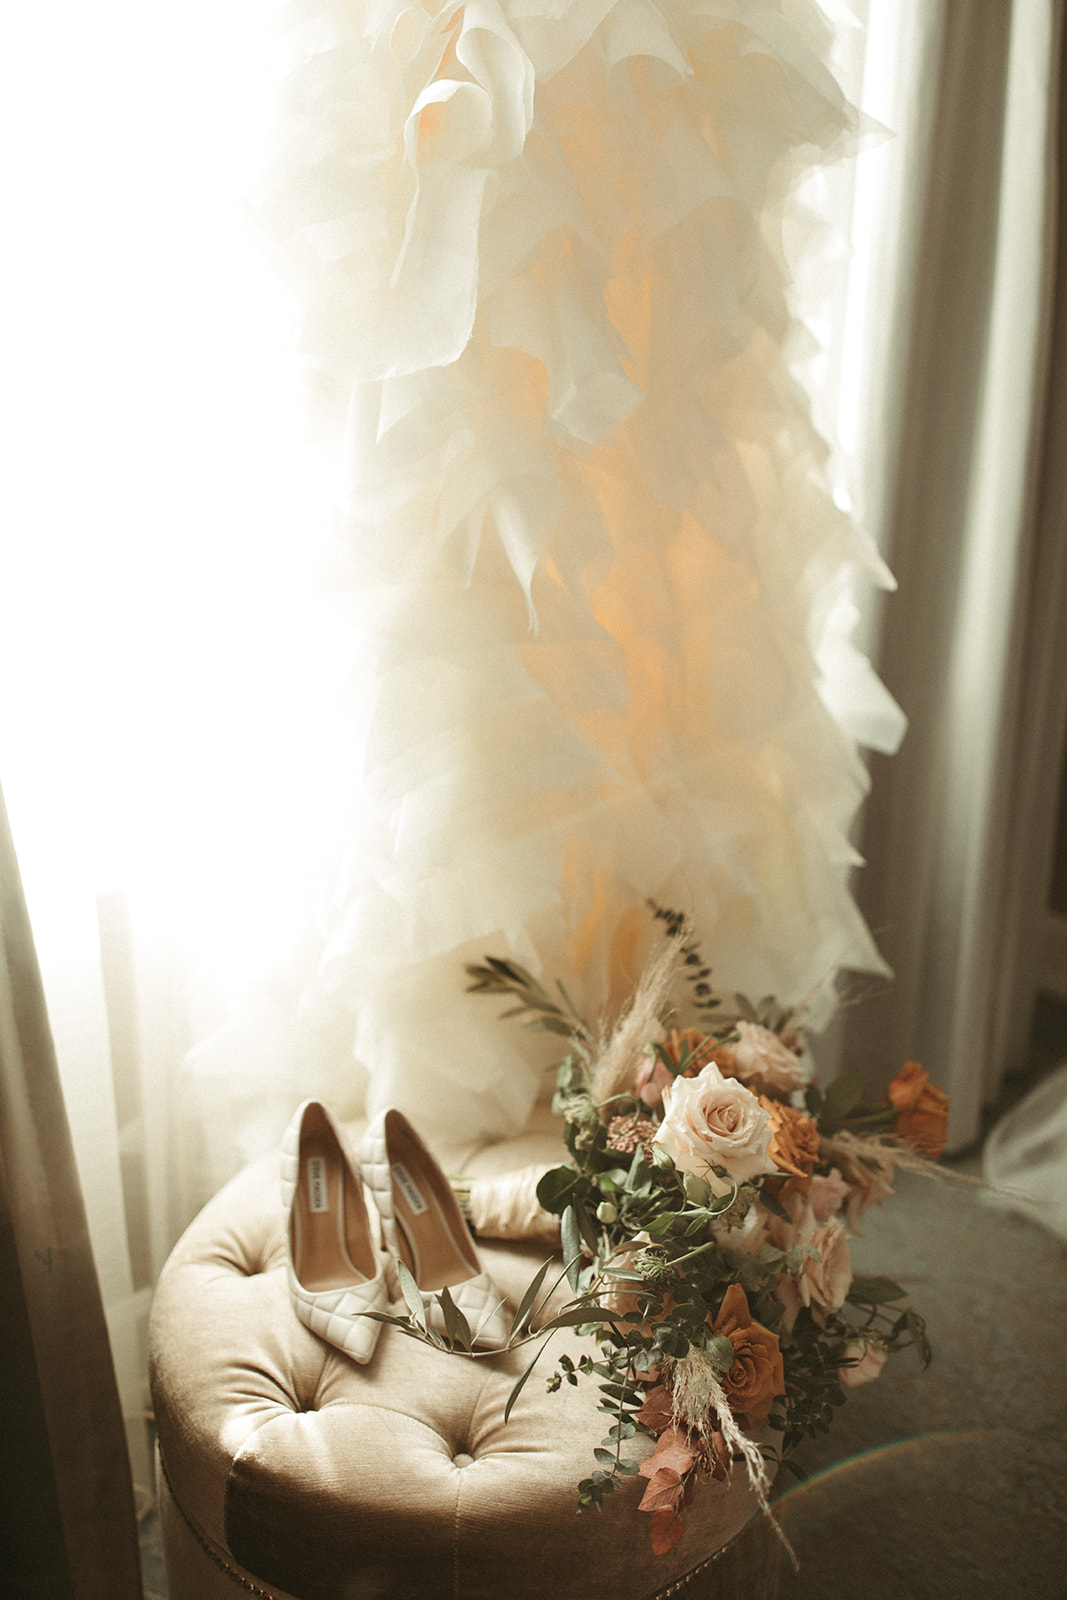 Wedding detials with gown, shoes, and bouquet